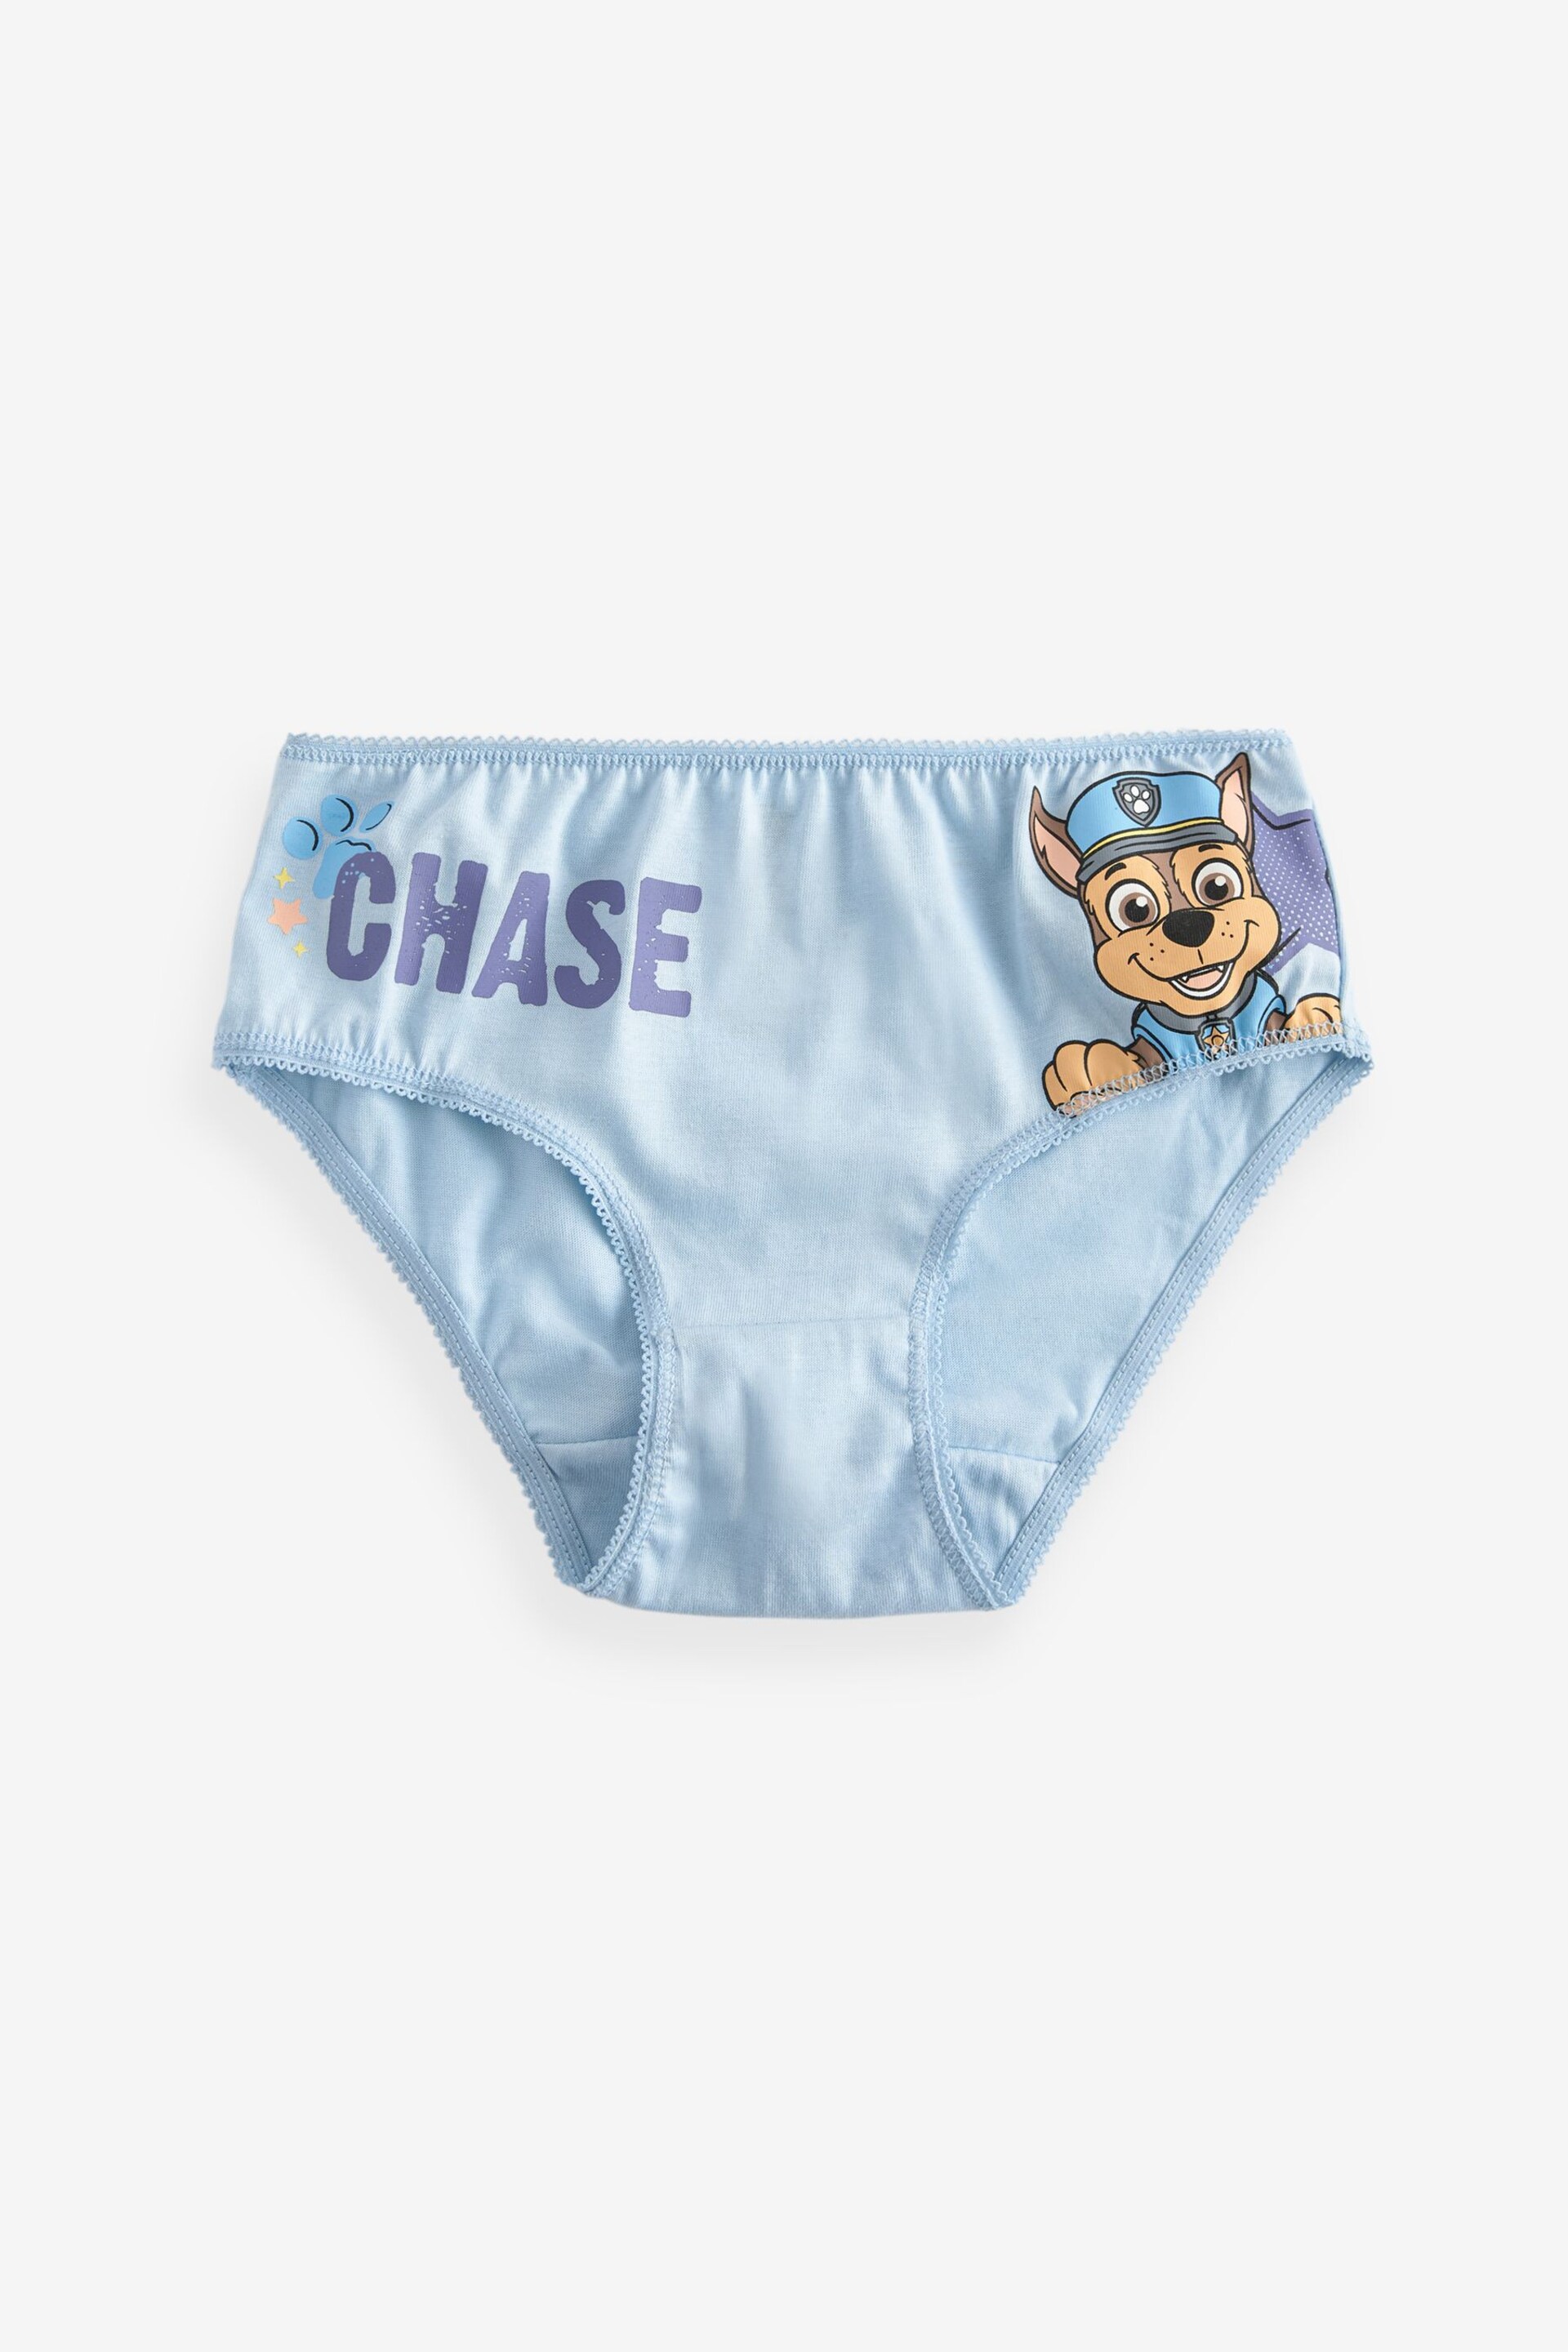 Blue/Pink Paw Patrol Briefs 5 Pack (2-8yrs) - Image 3 of 8